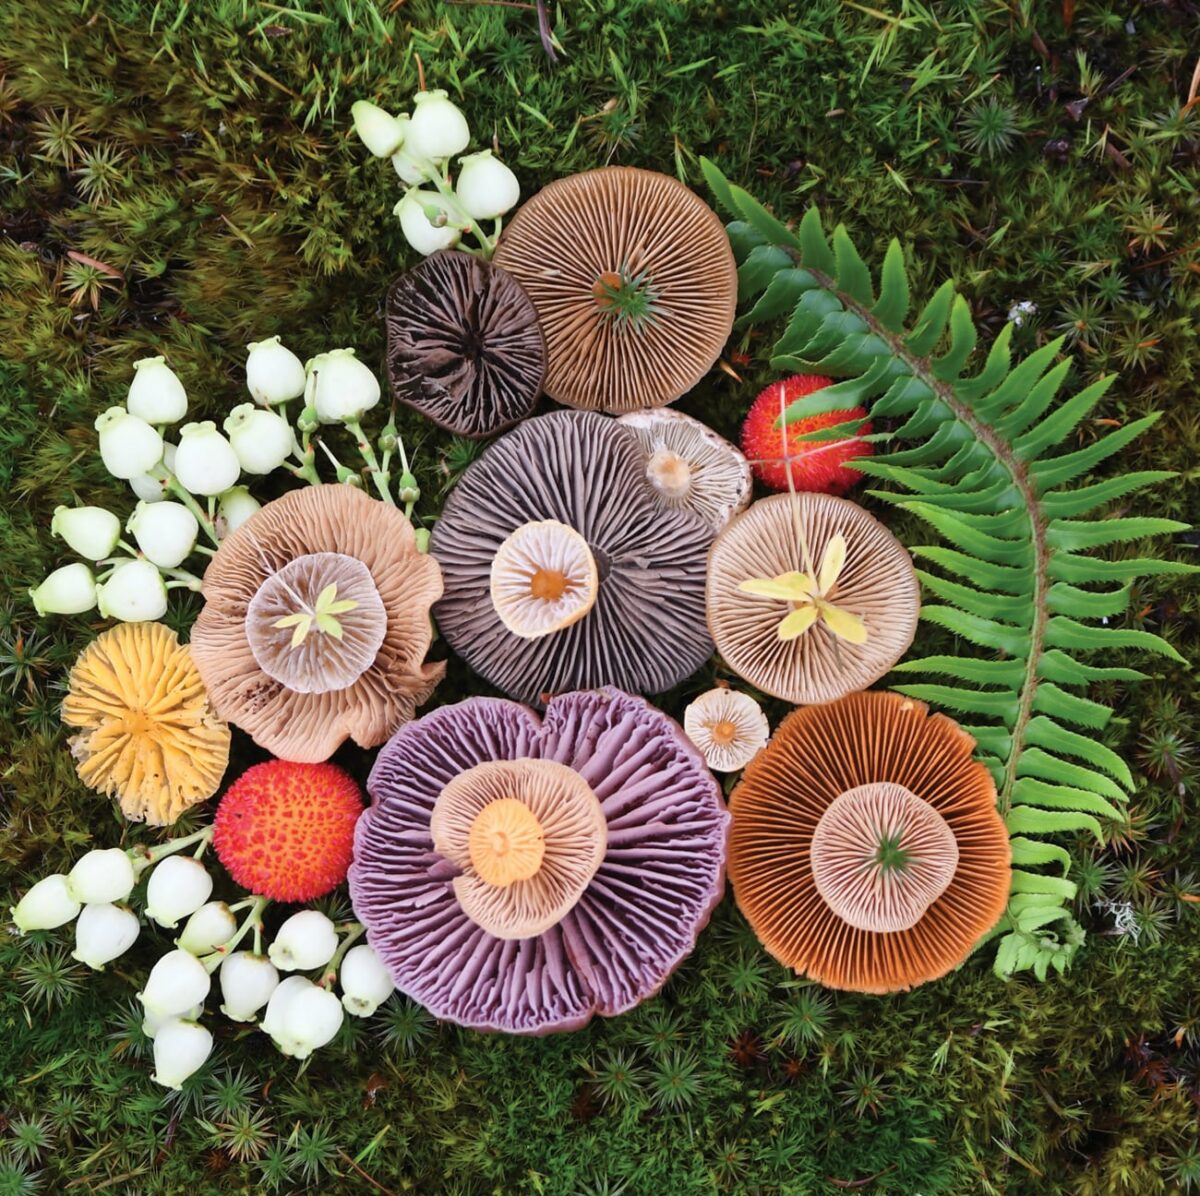 Colorful Arrangements Made Of Mushrooms By Jill Bliss 7